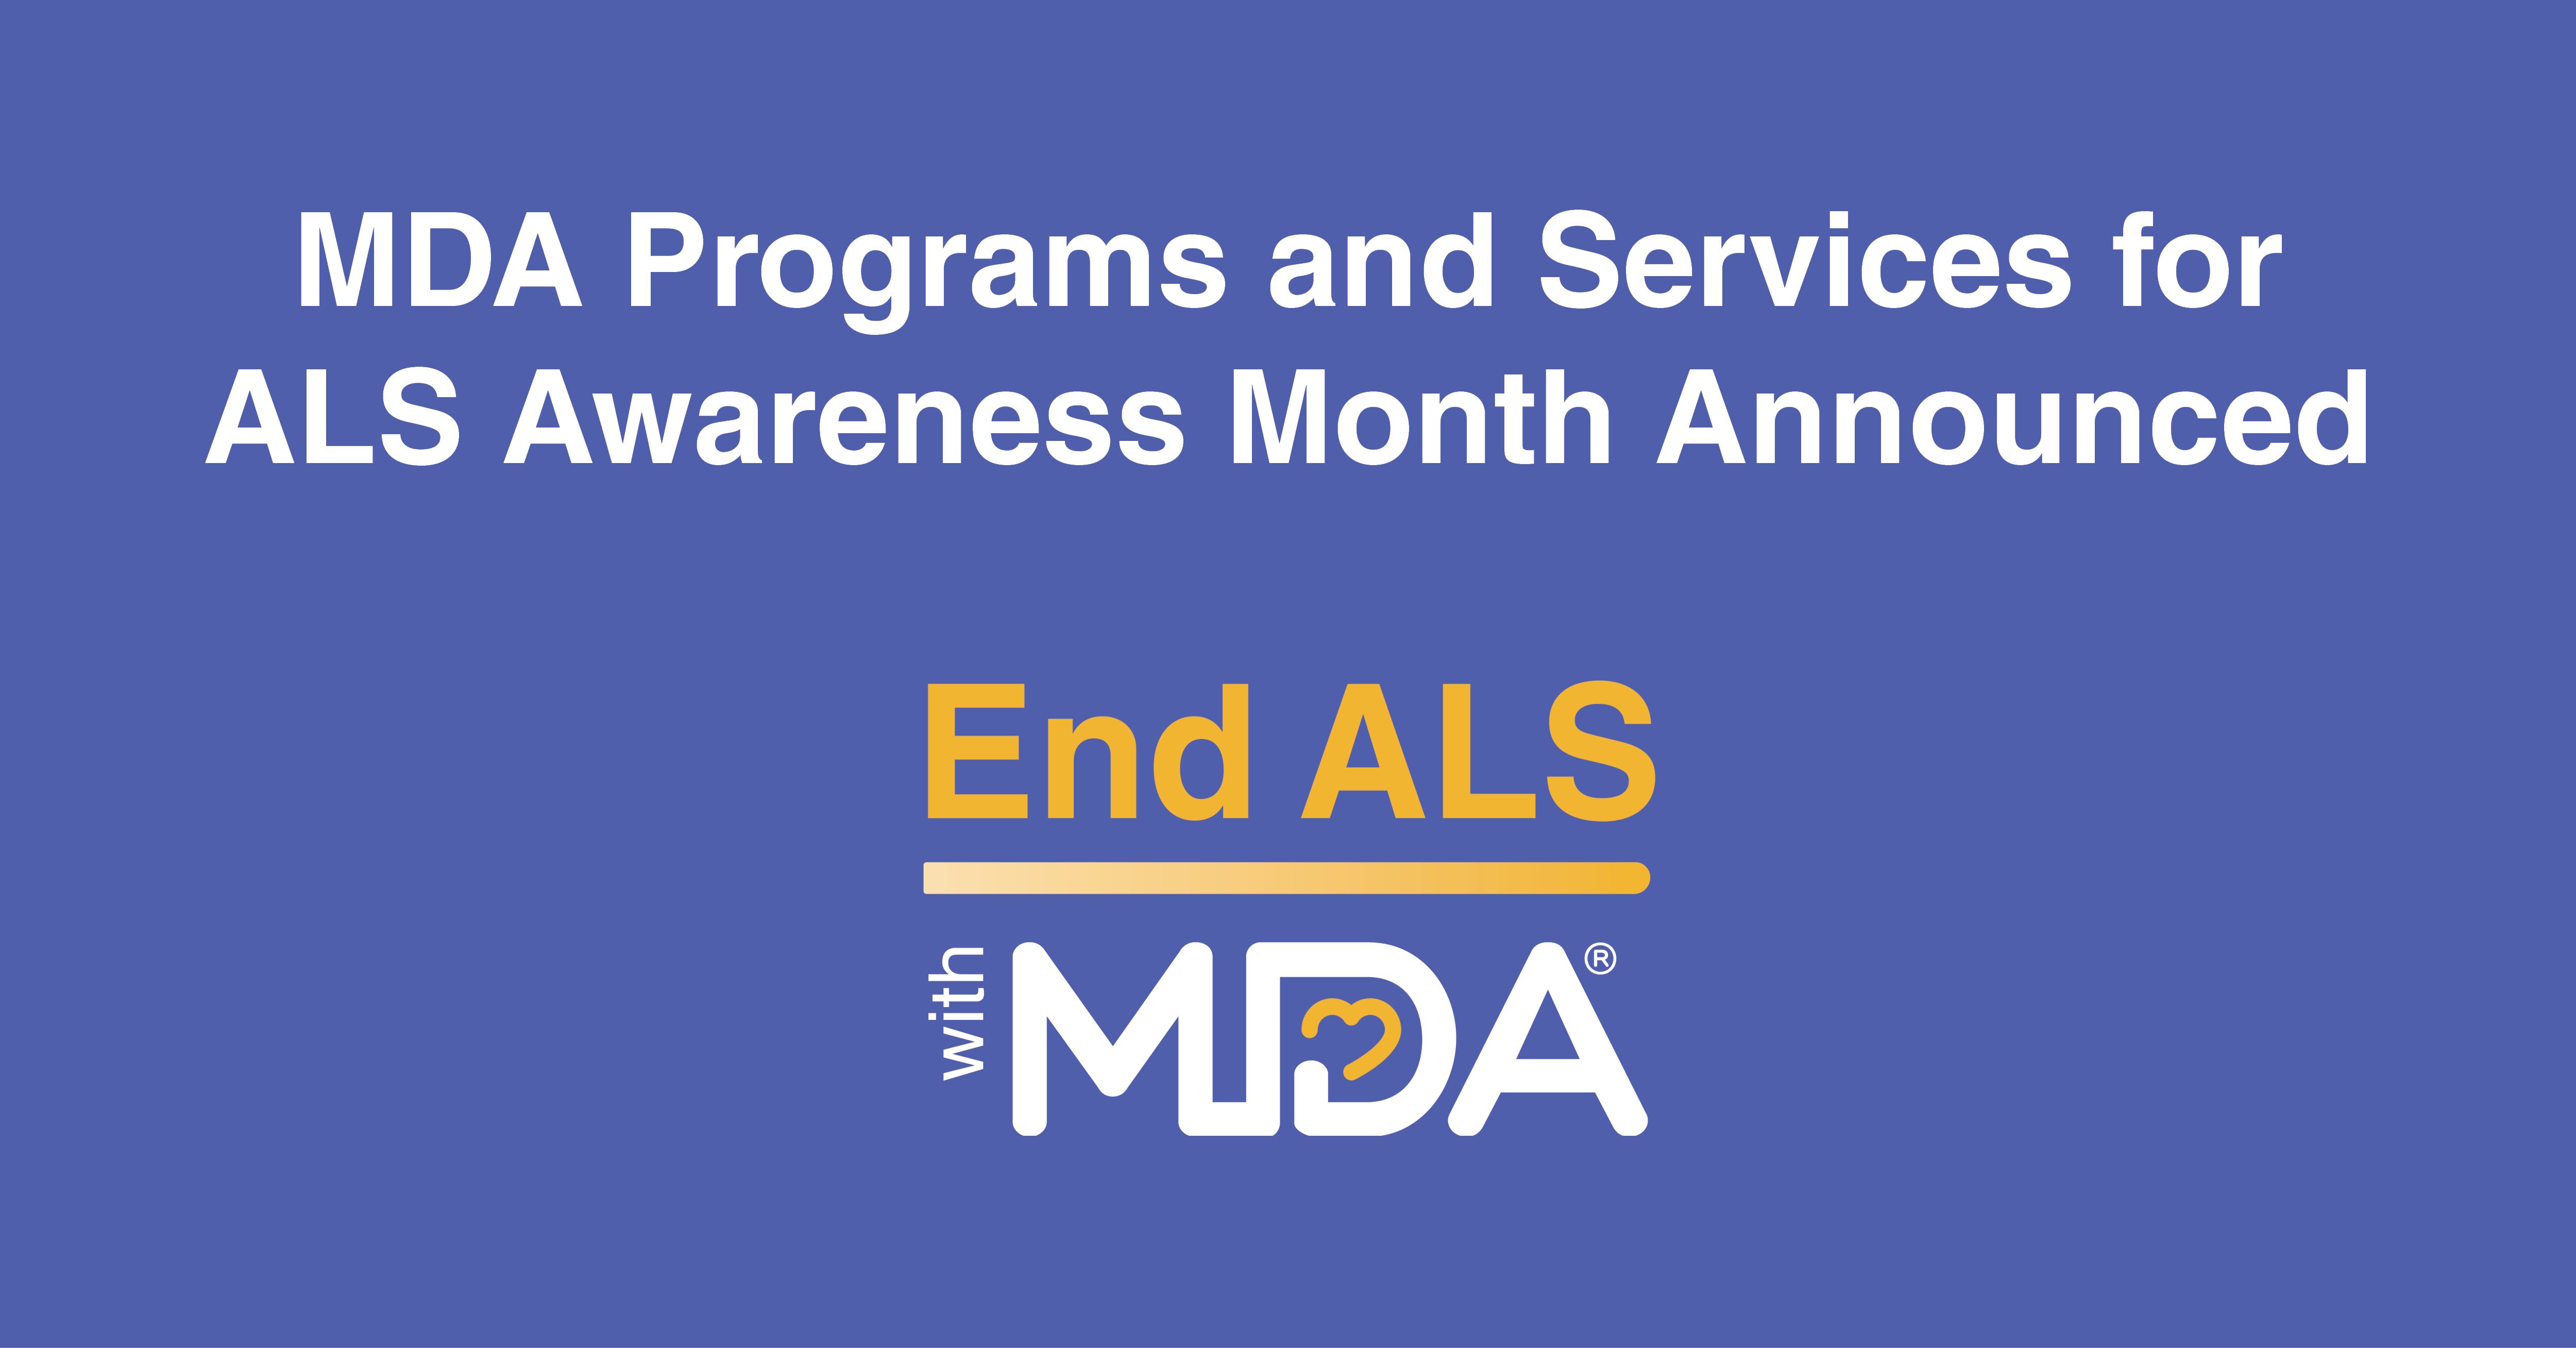 End ALS with MDA